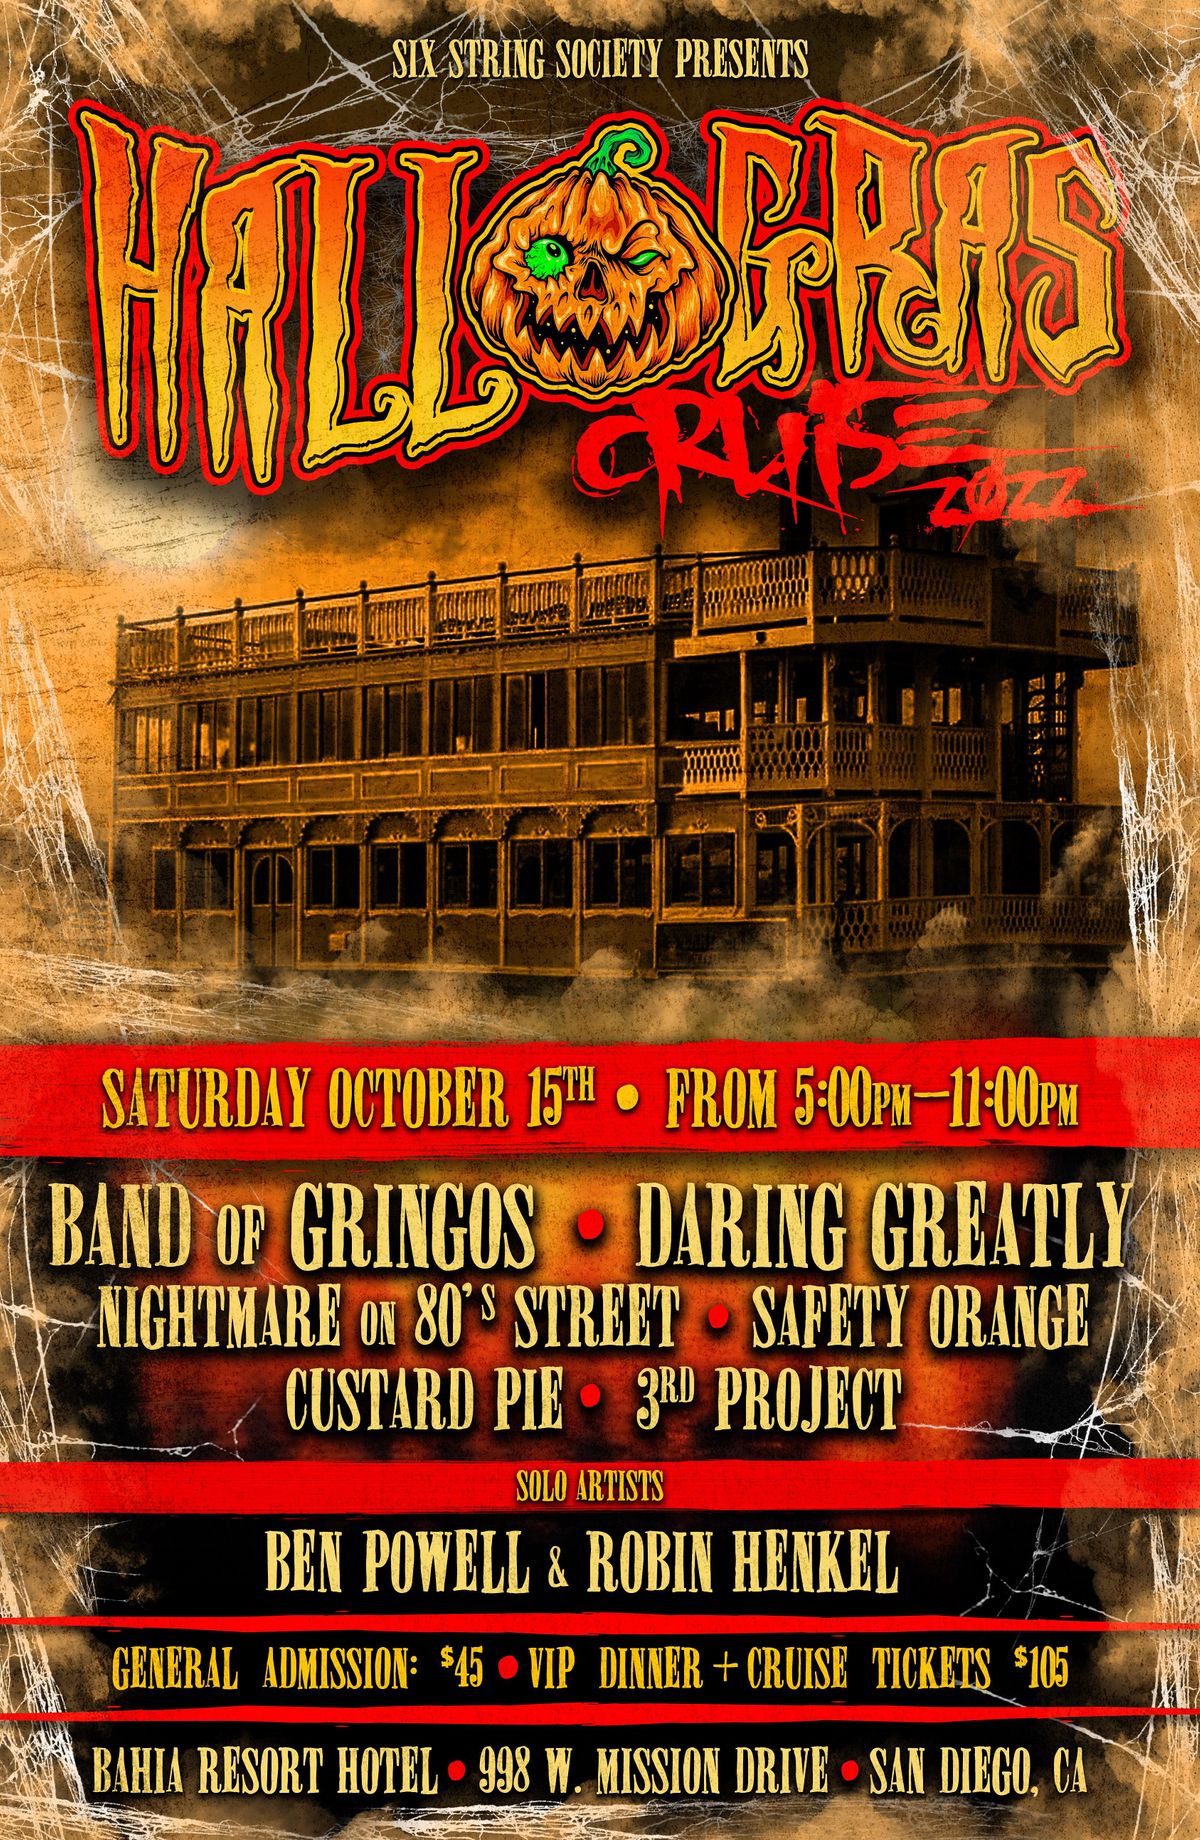 The Return of the HalloGras cruise